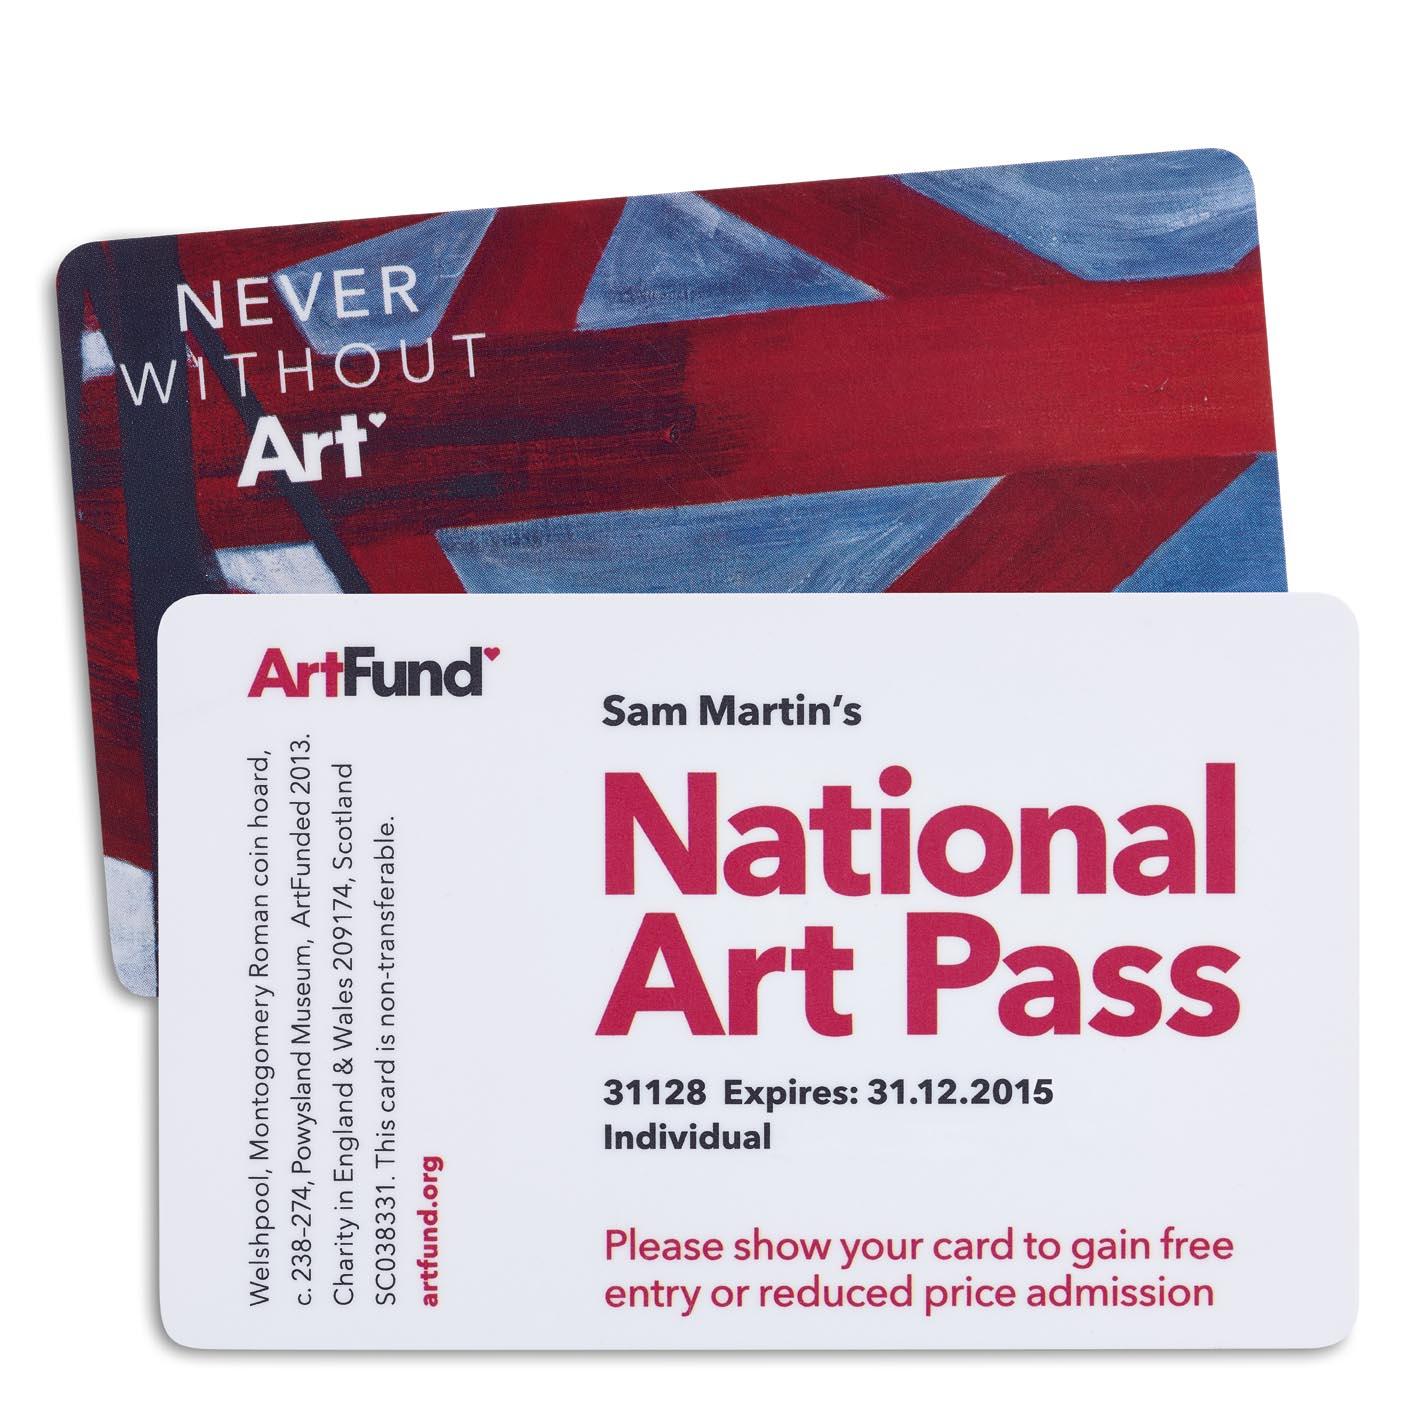 SECOND CHANCE TO GET A FREE STUDENT NATIONAL ART PASS - If you sign up before January 30th. As part of our partnership with the Art Fund, we're offering History of Art and Architecture students a FREE Student National Art Pass. 